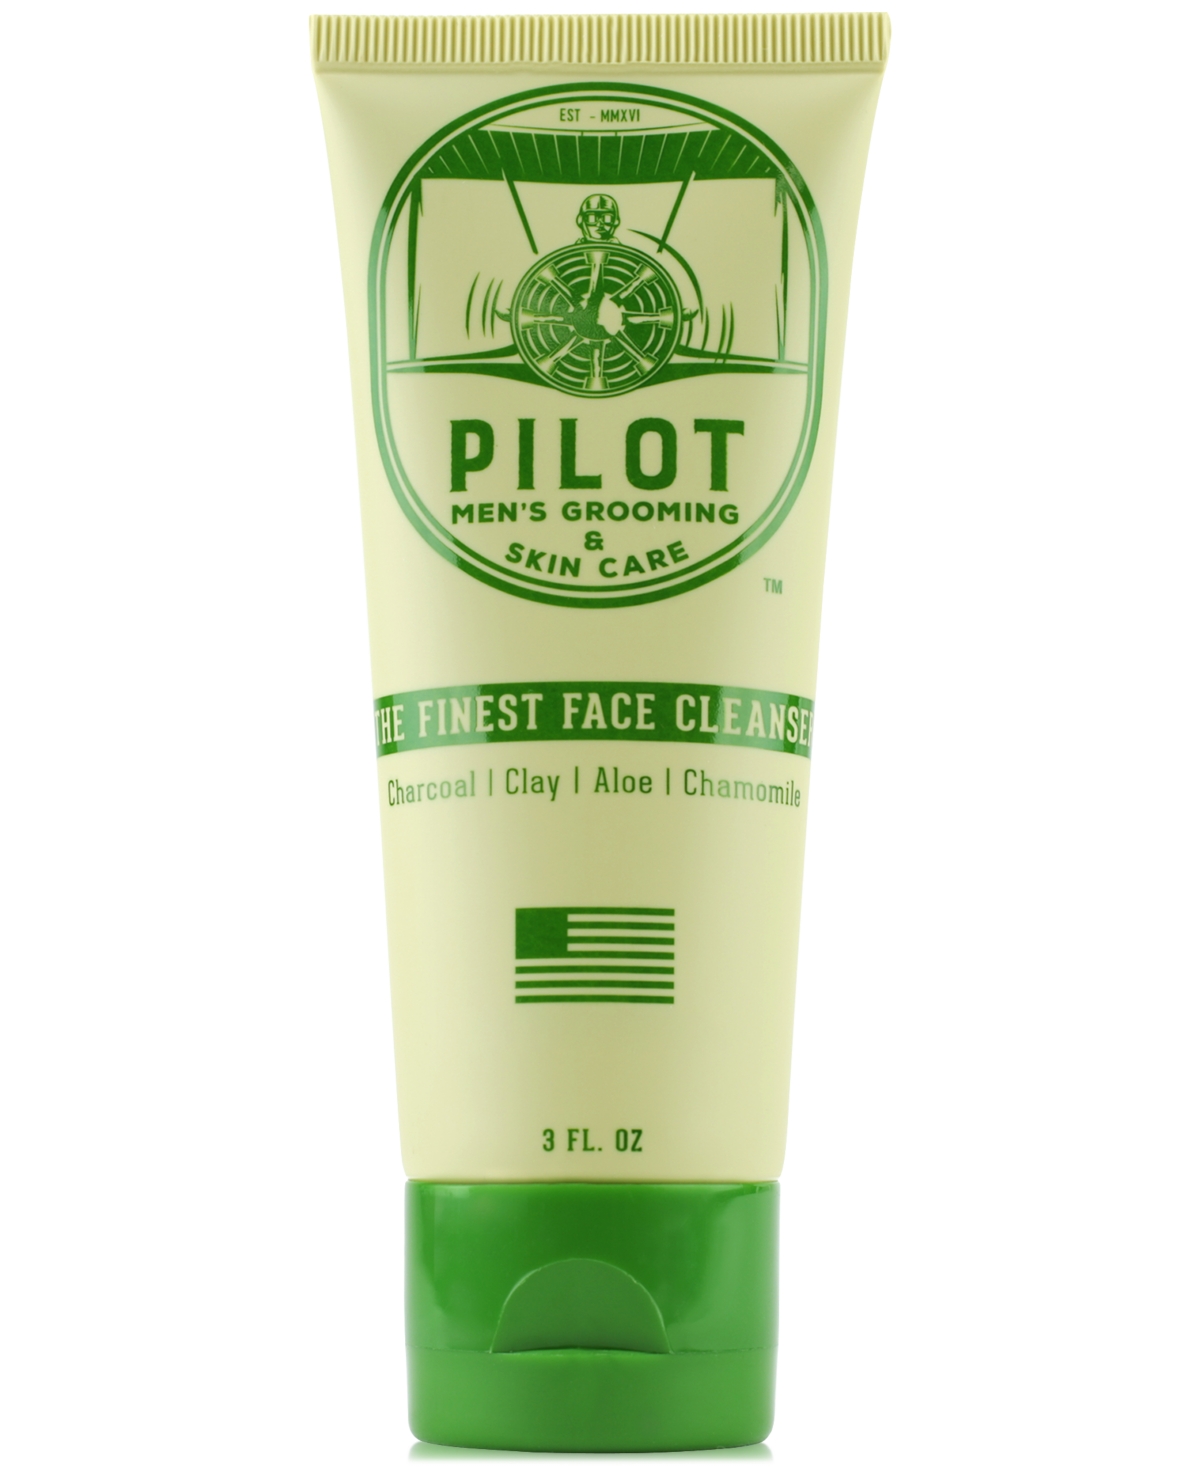 The Finest Face Cleanser, 3 oz. - Tan/green